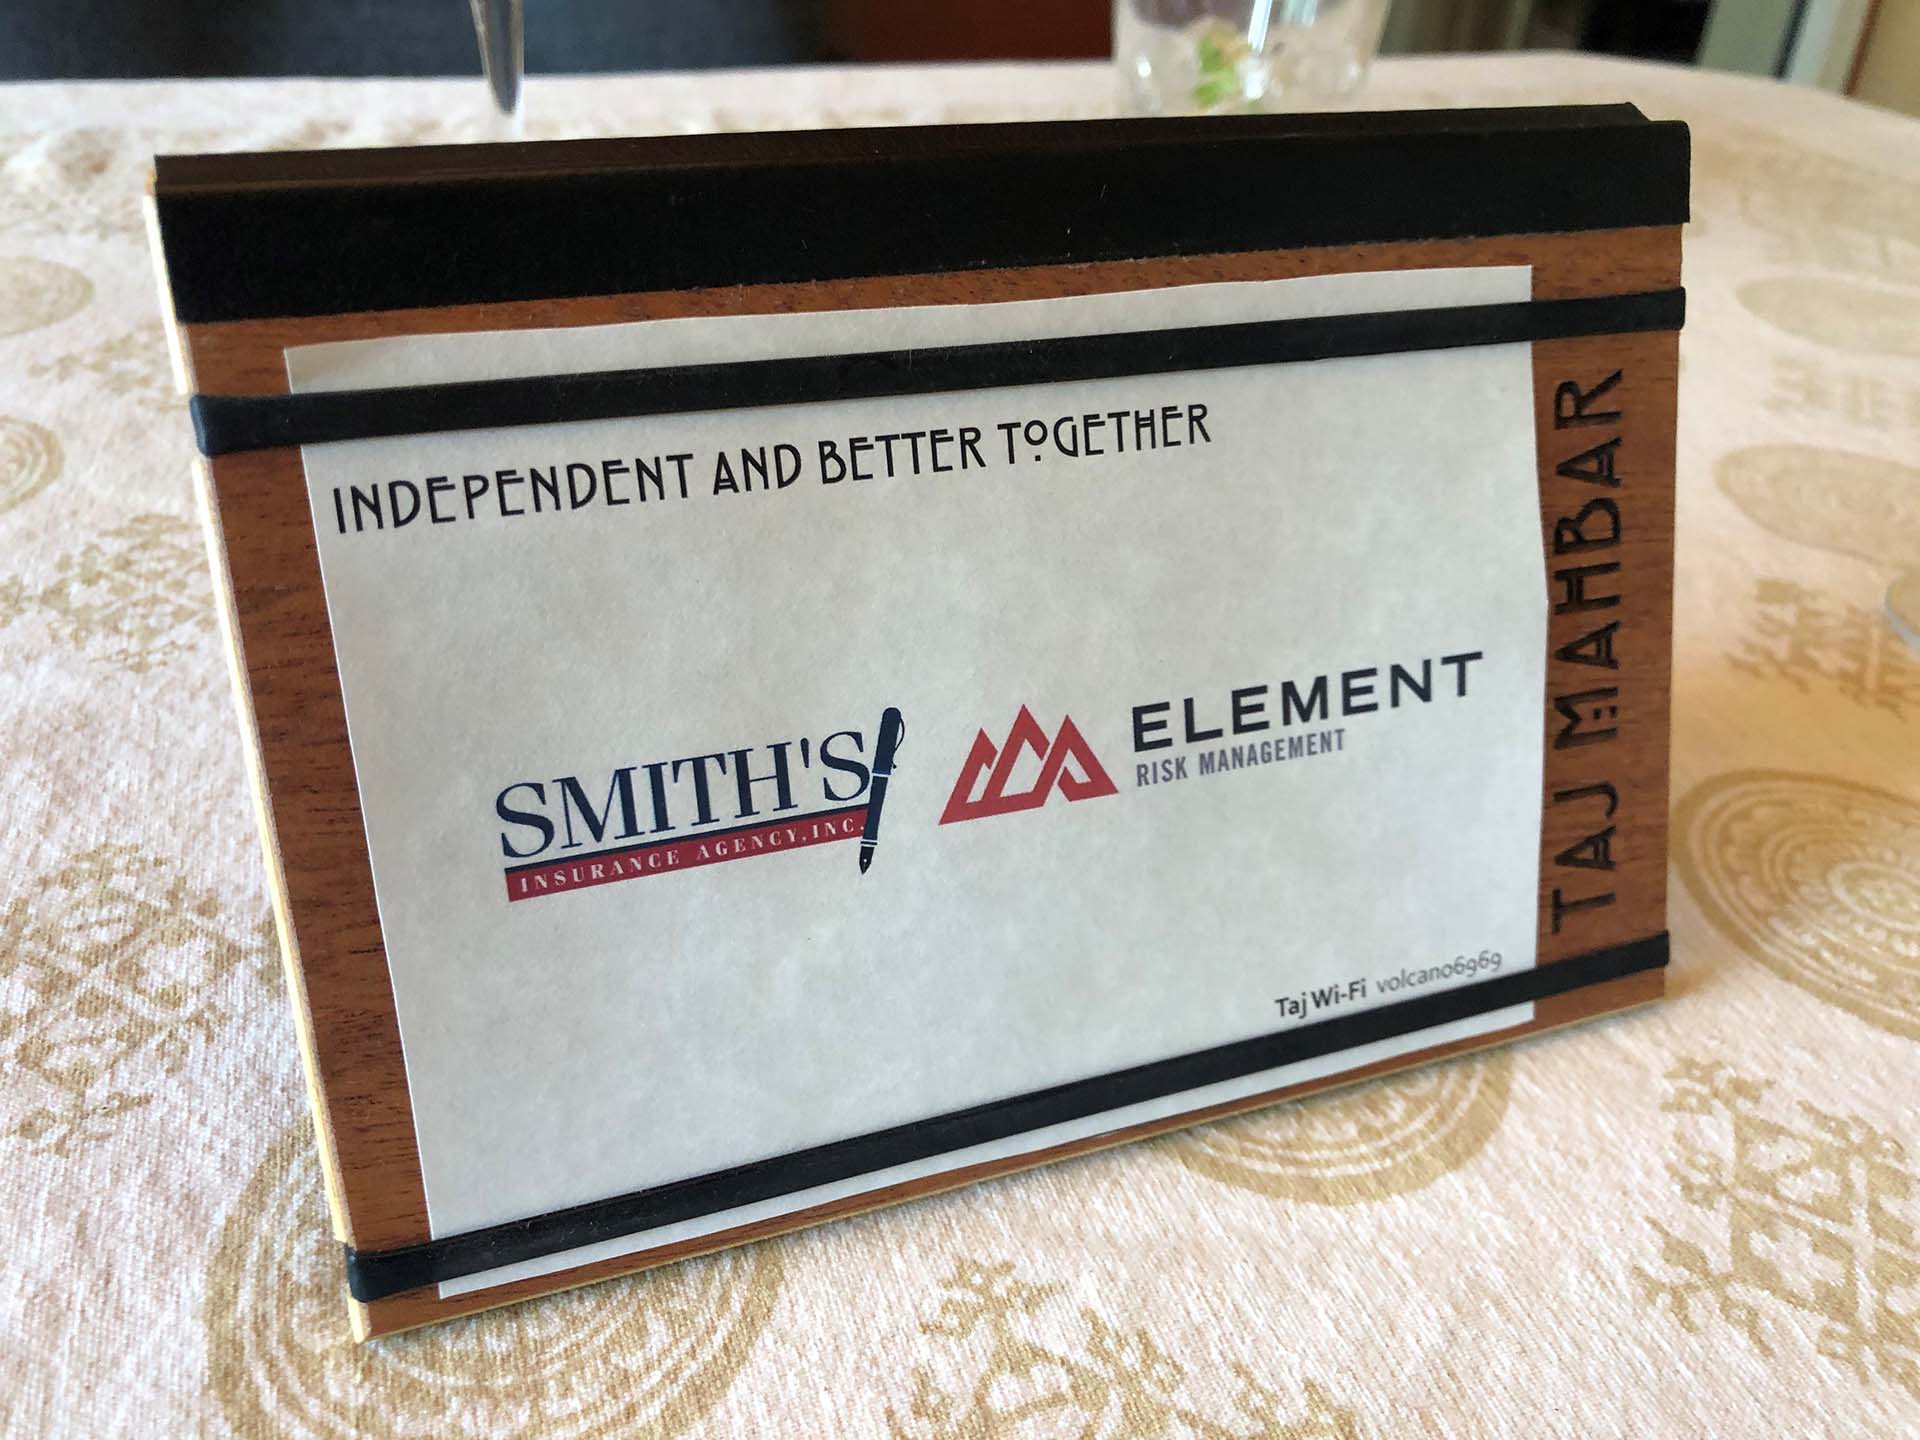 Blog - View of Plaque on Table with Smiths Insurance Agency and Element Risk Management Logo